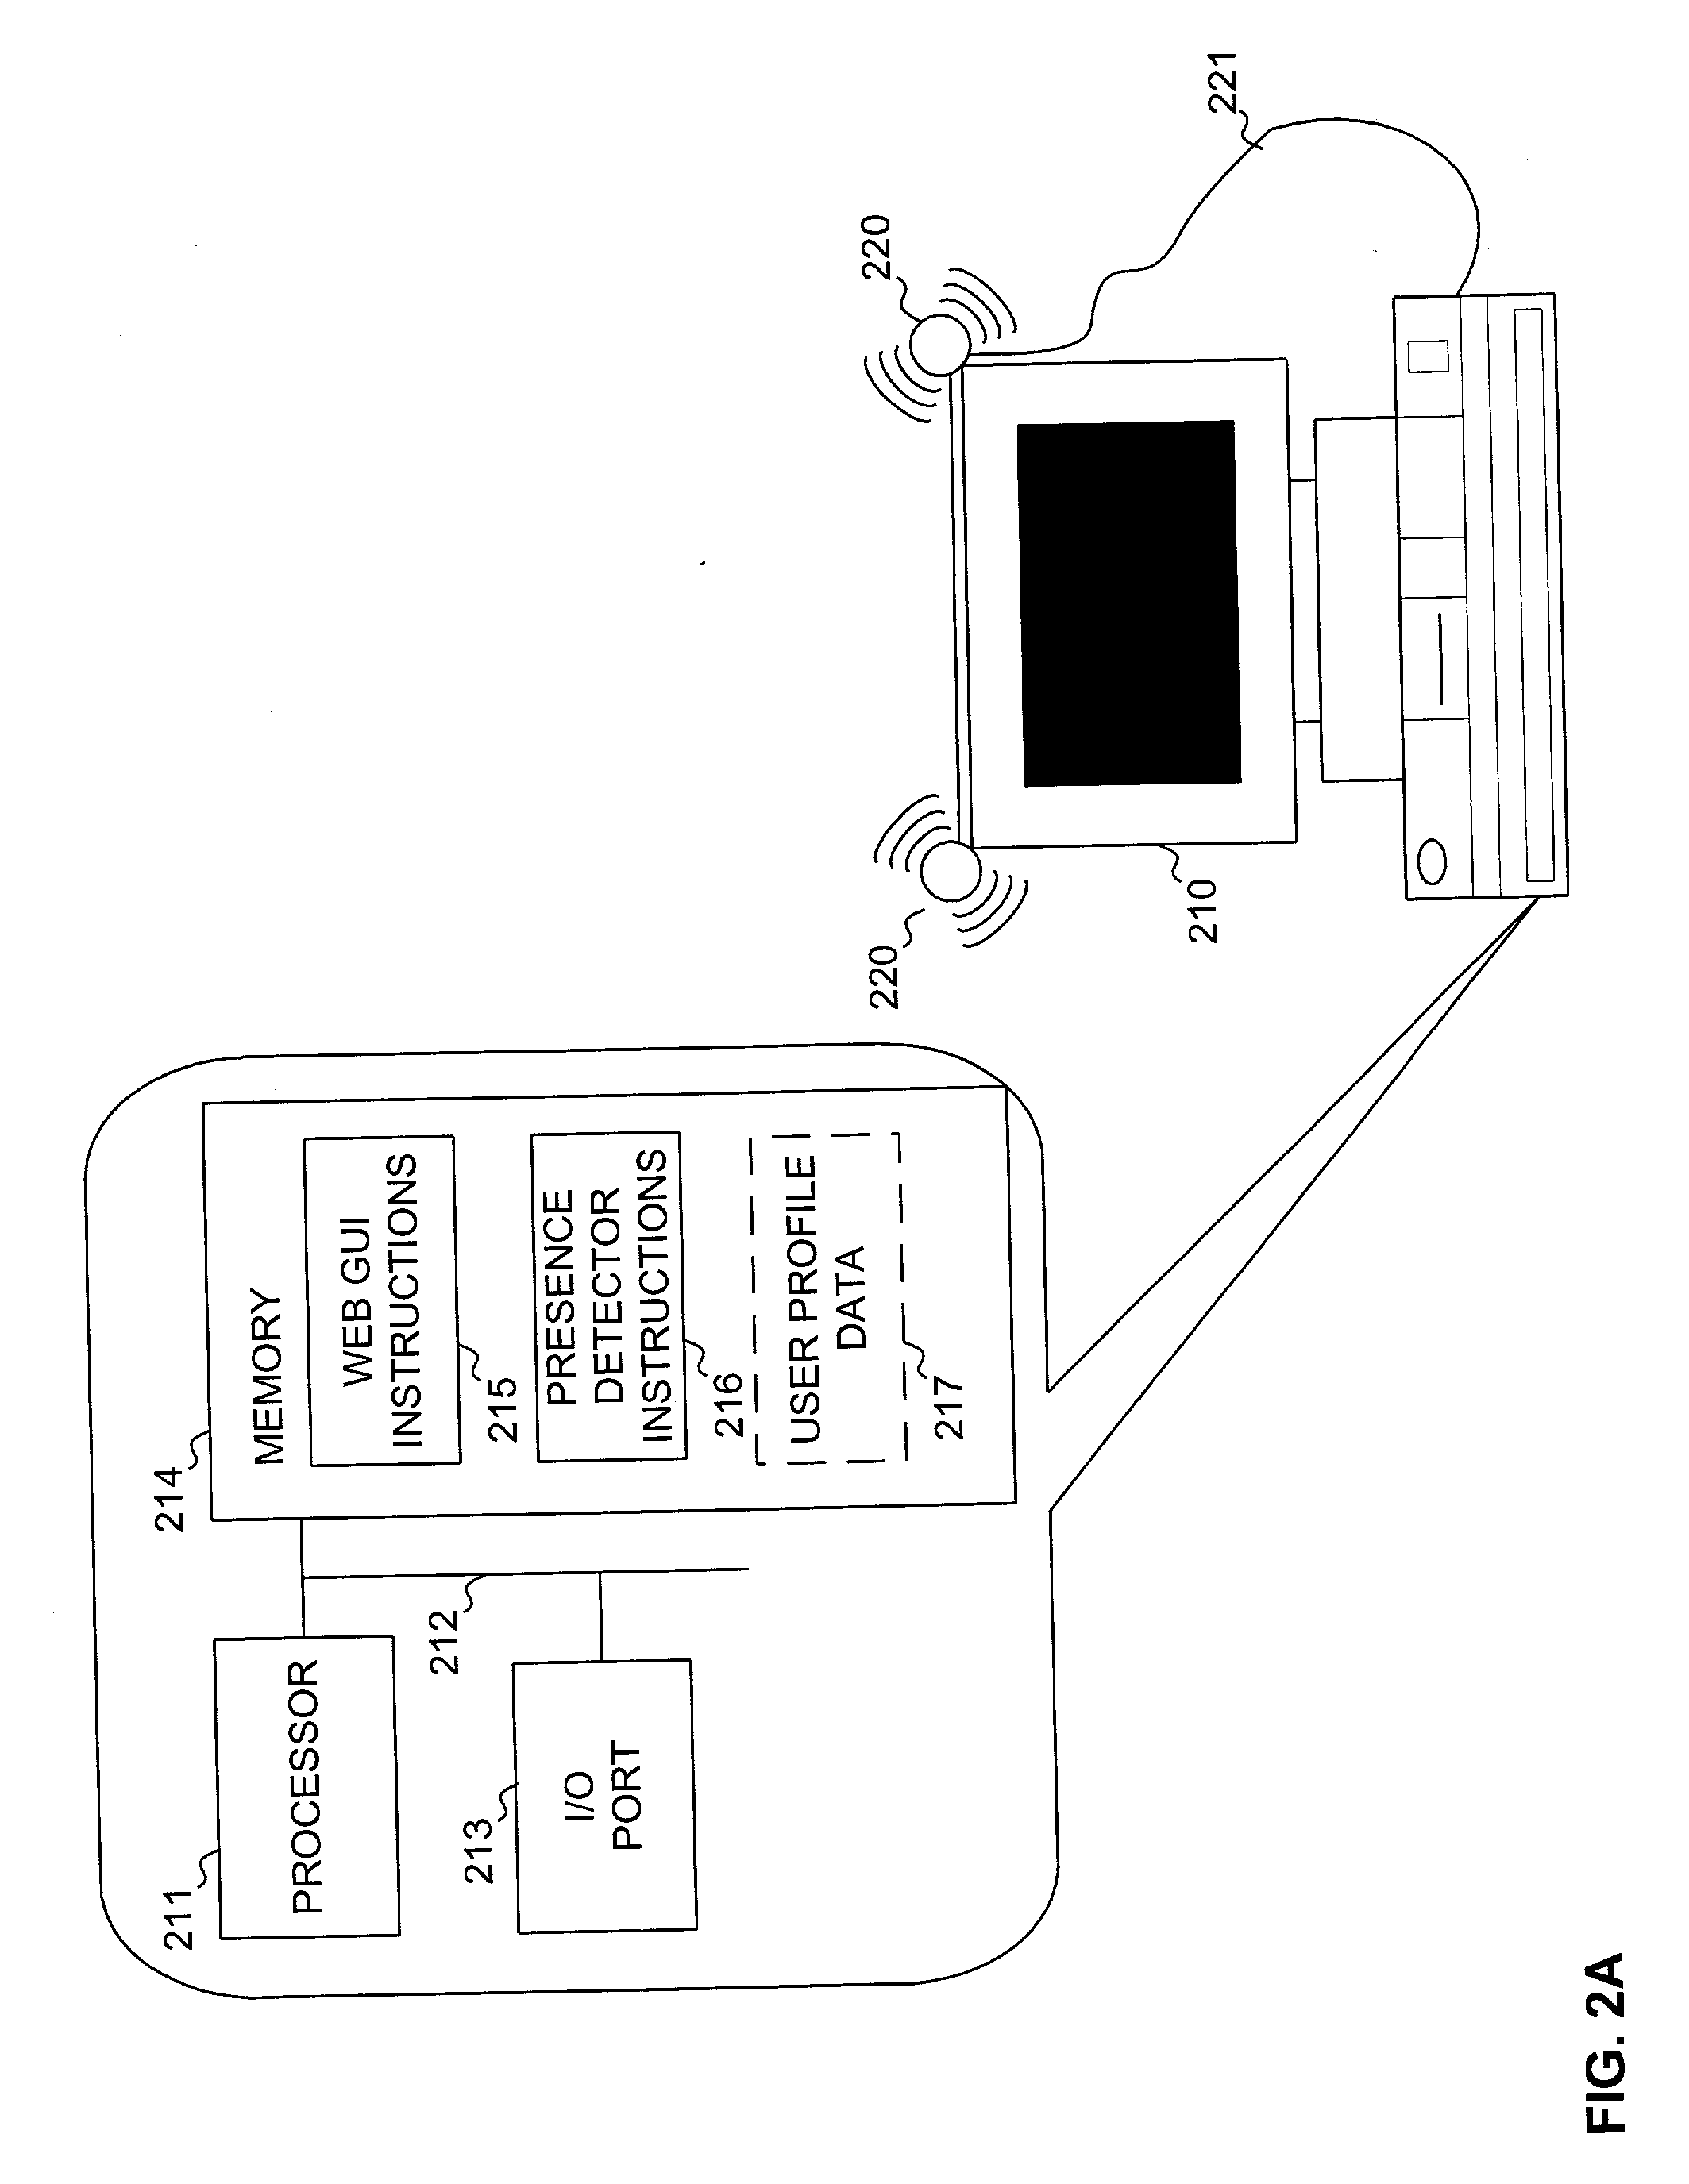 Remote presence recognition information delivery systems and methods